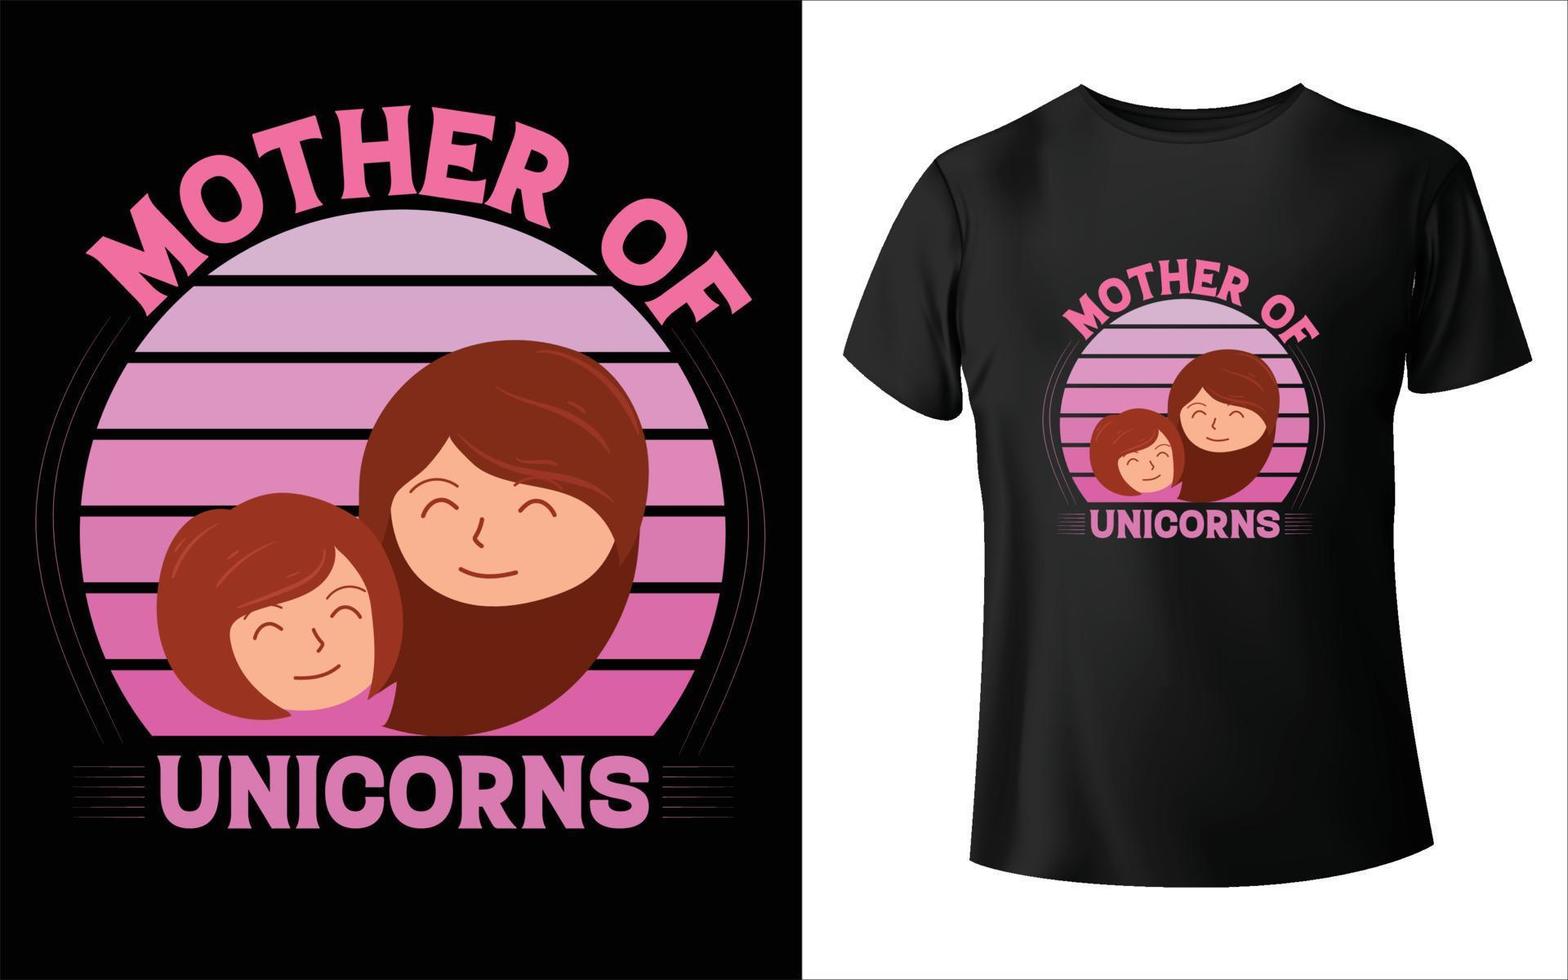 Happy mother's day t-shirt design. Mom Vector, Vector Art, Mom T-Shirt Design